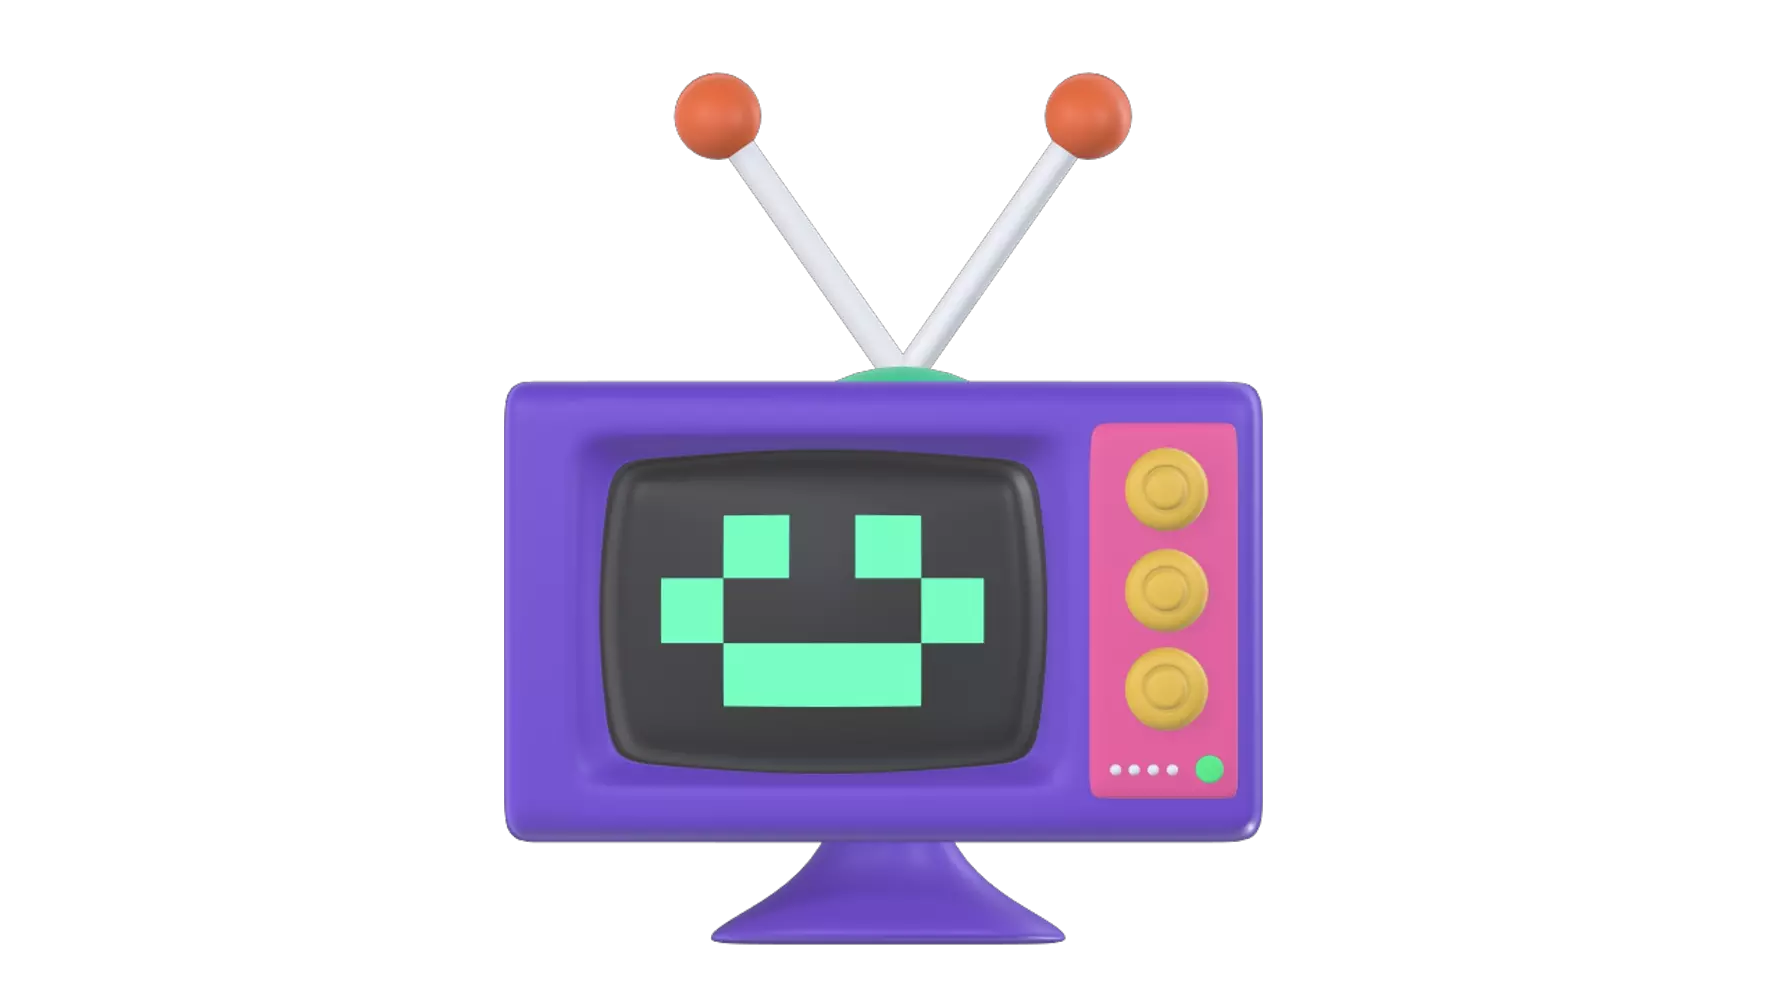 Old TV 3D Graphic